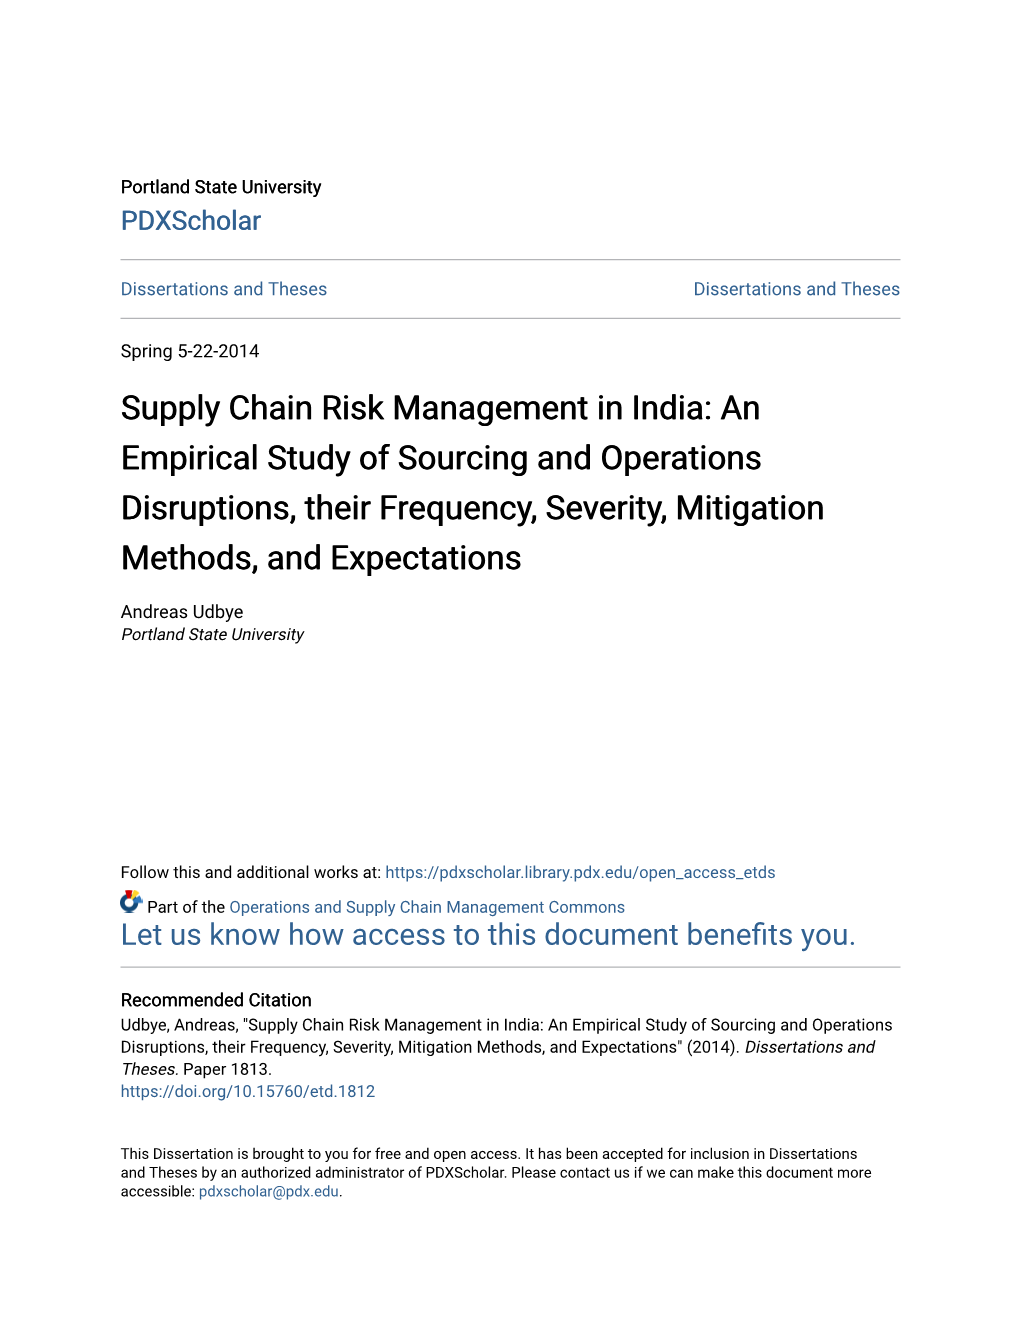 Supply Chain Risk Management in India: an Empirical Study of Sourcing and Operations Disruptions, Their Frequency, Severity, Mitigation Methods, and Expectations